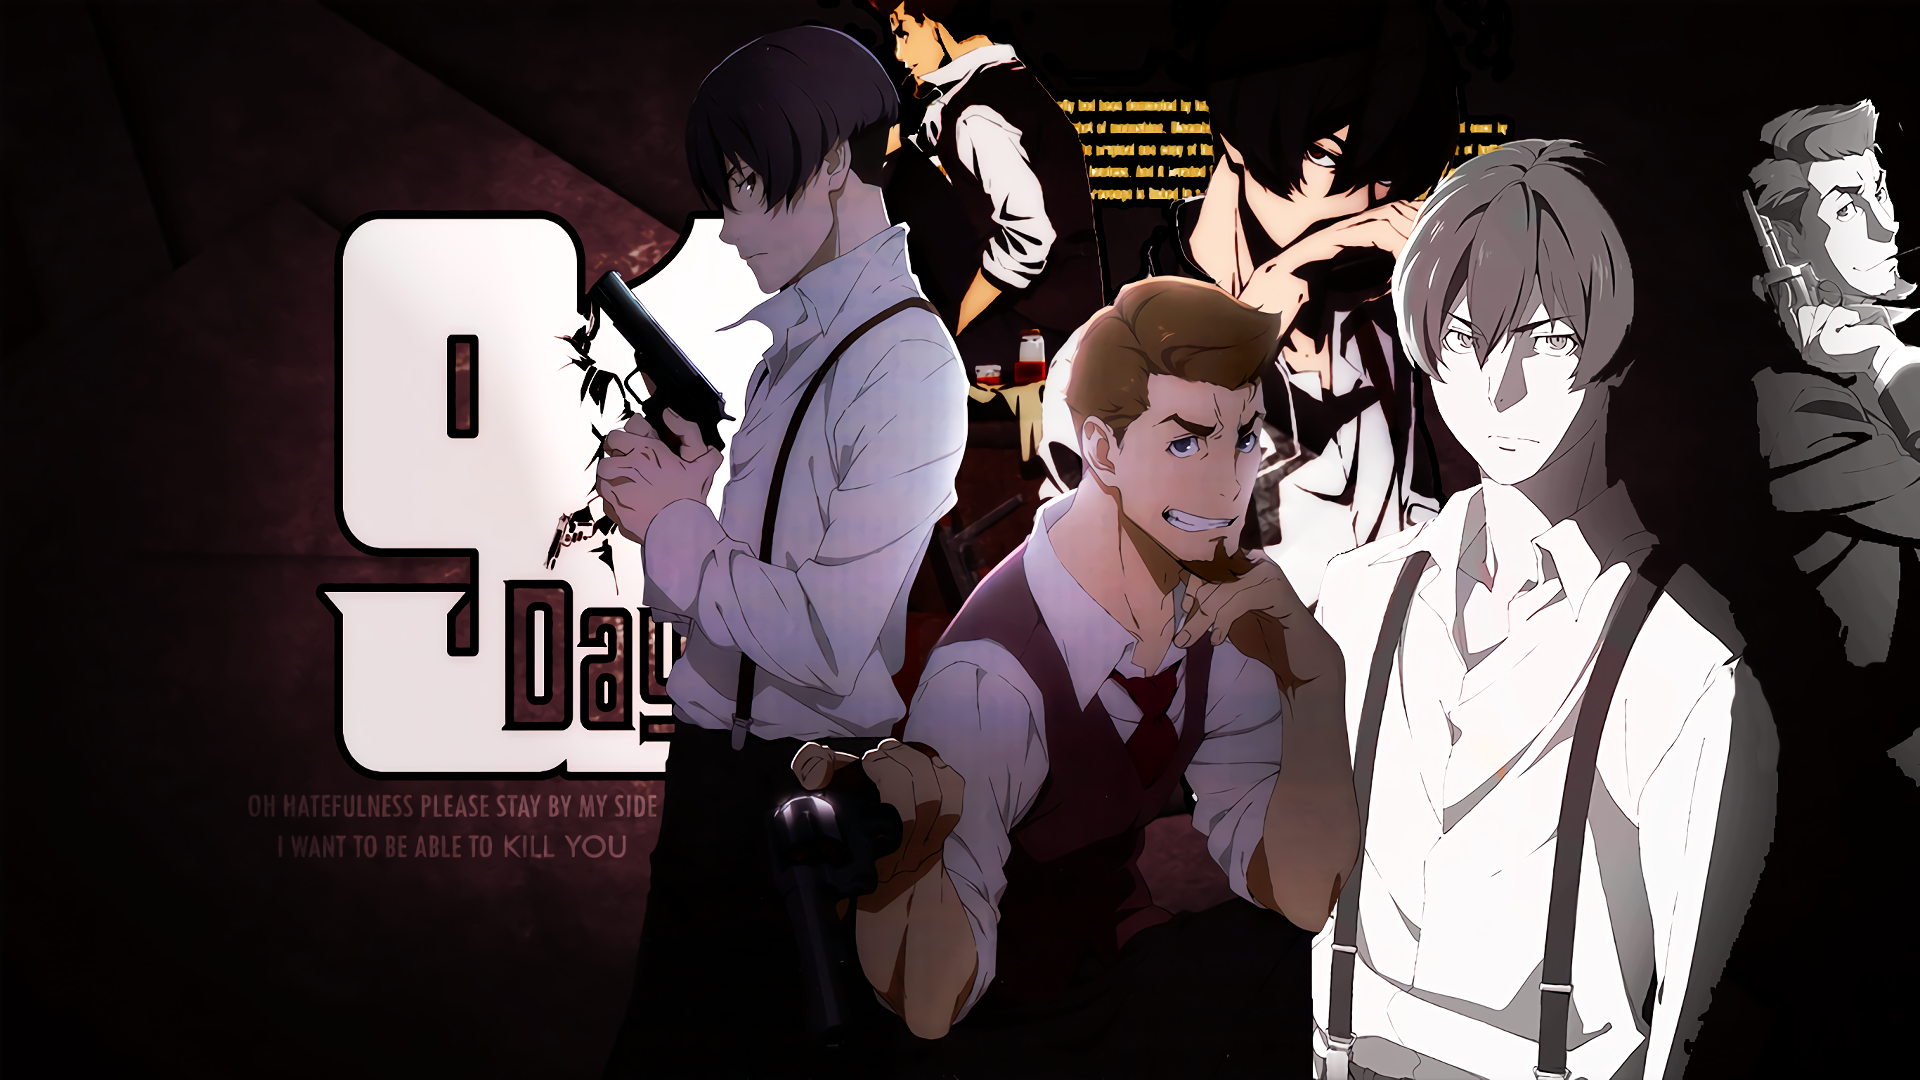 Anime 91 Days HD Wallpaper | Background Image